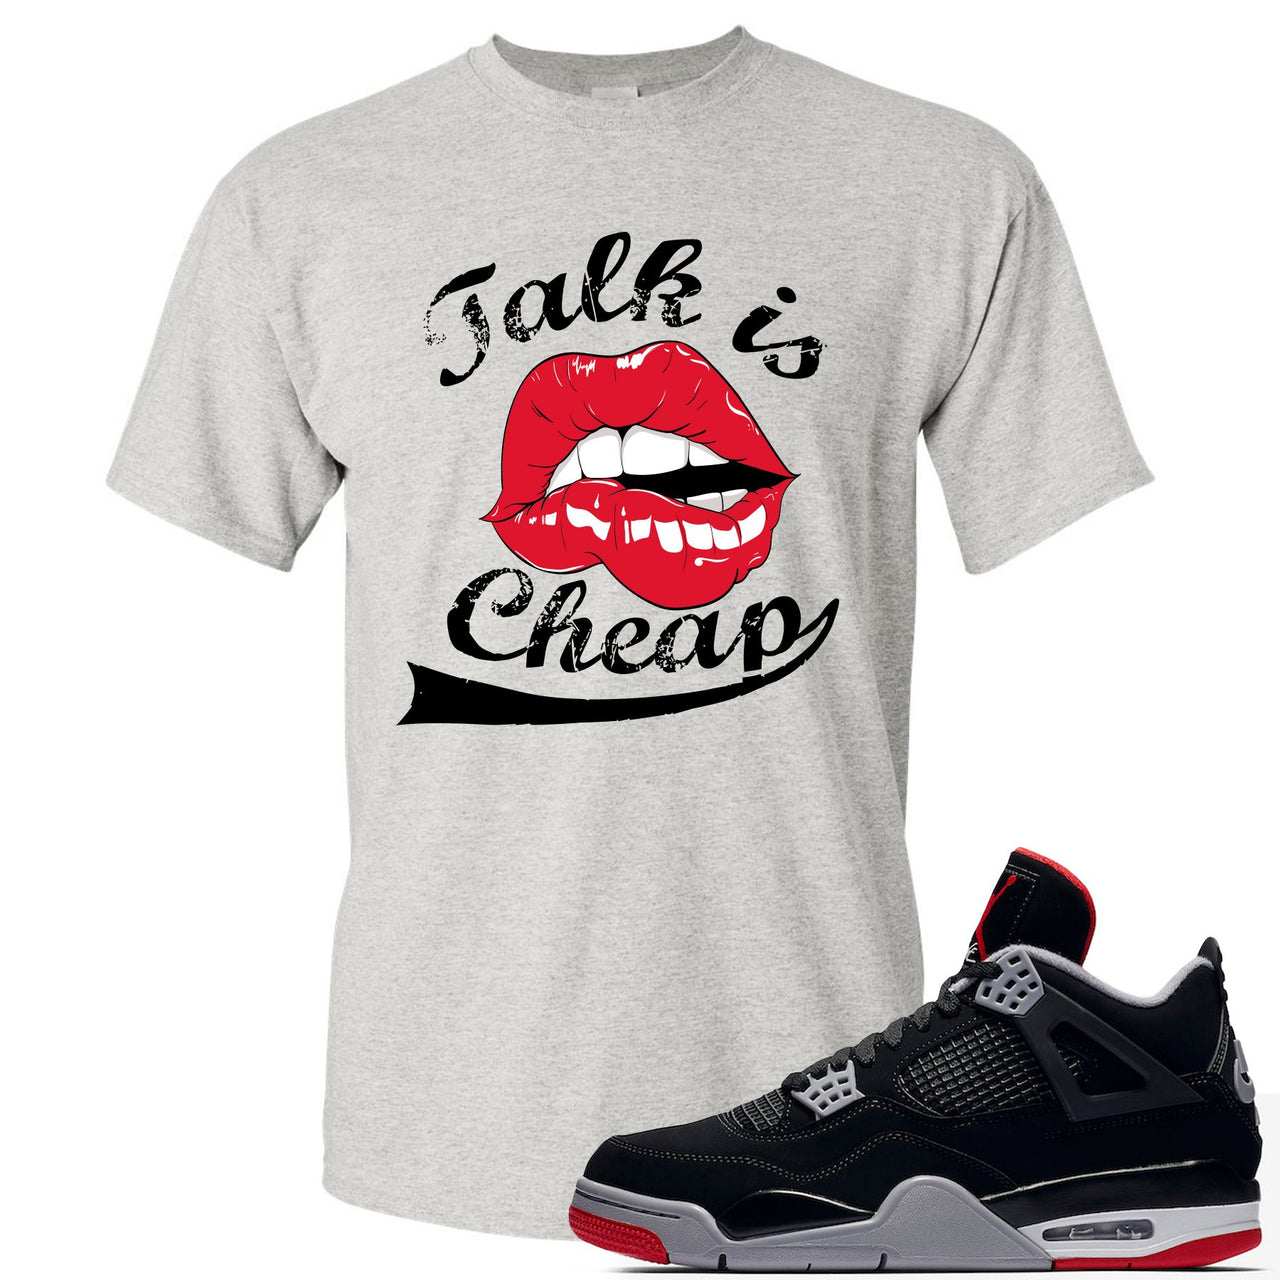 This grey and red t-shirt will match great with your Air Jordan 4 Bred shoes